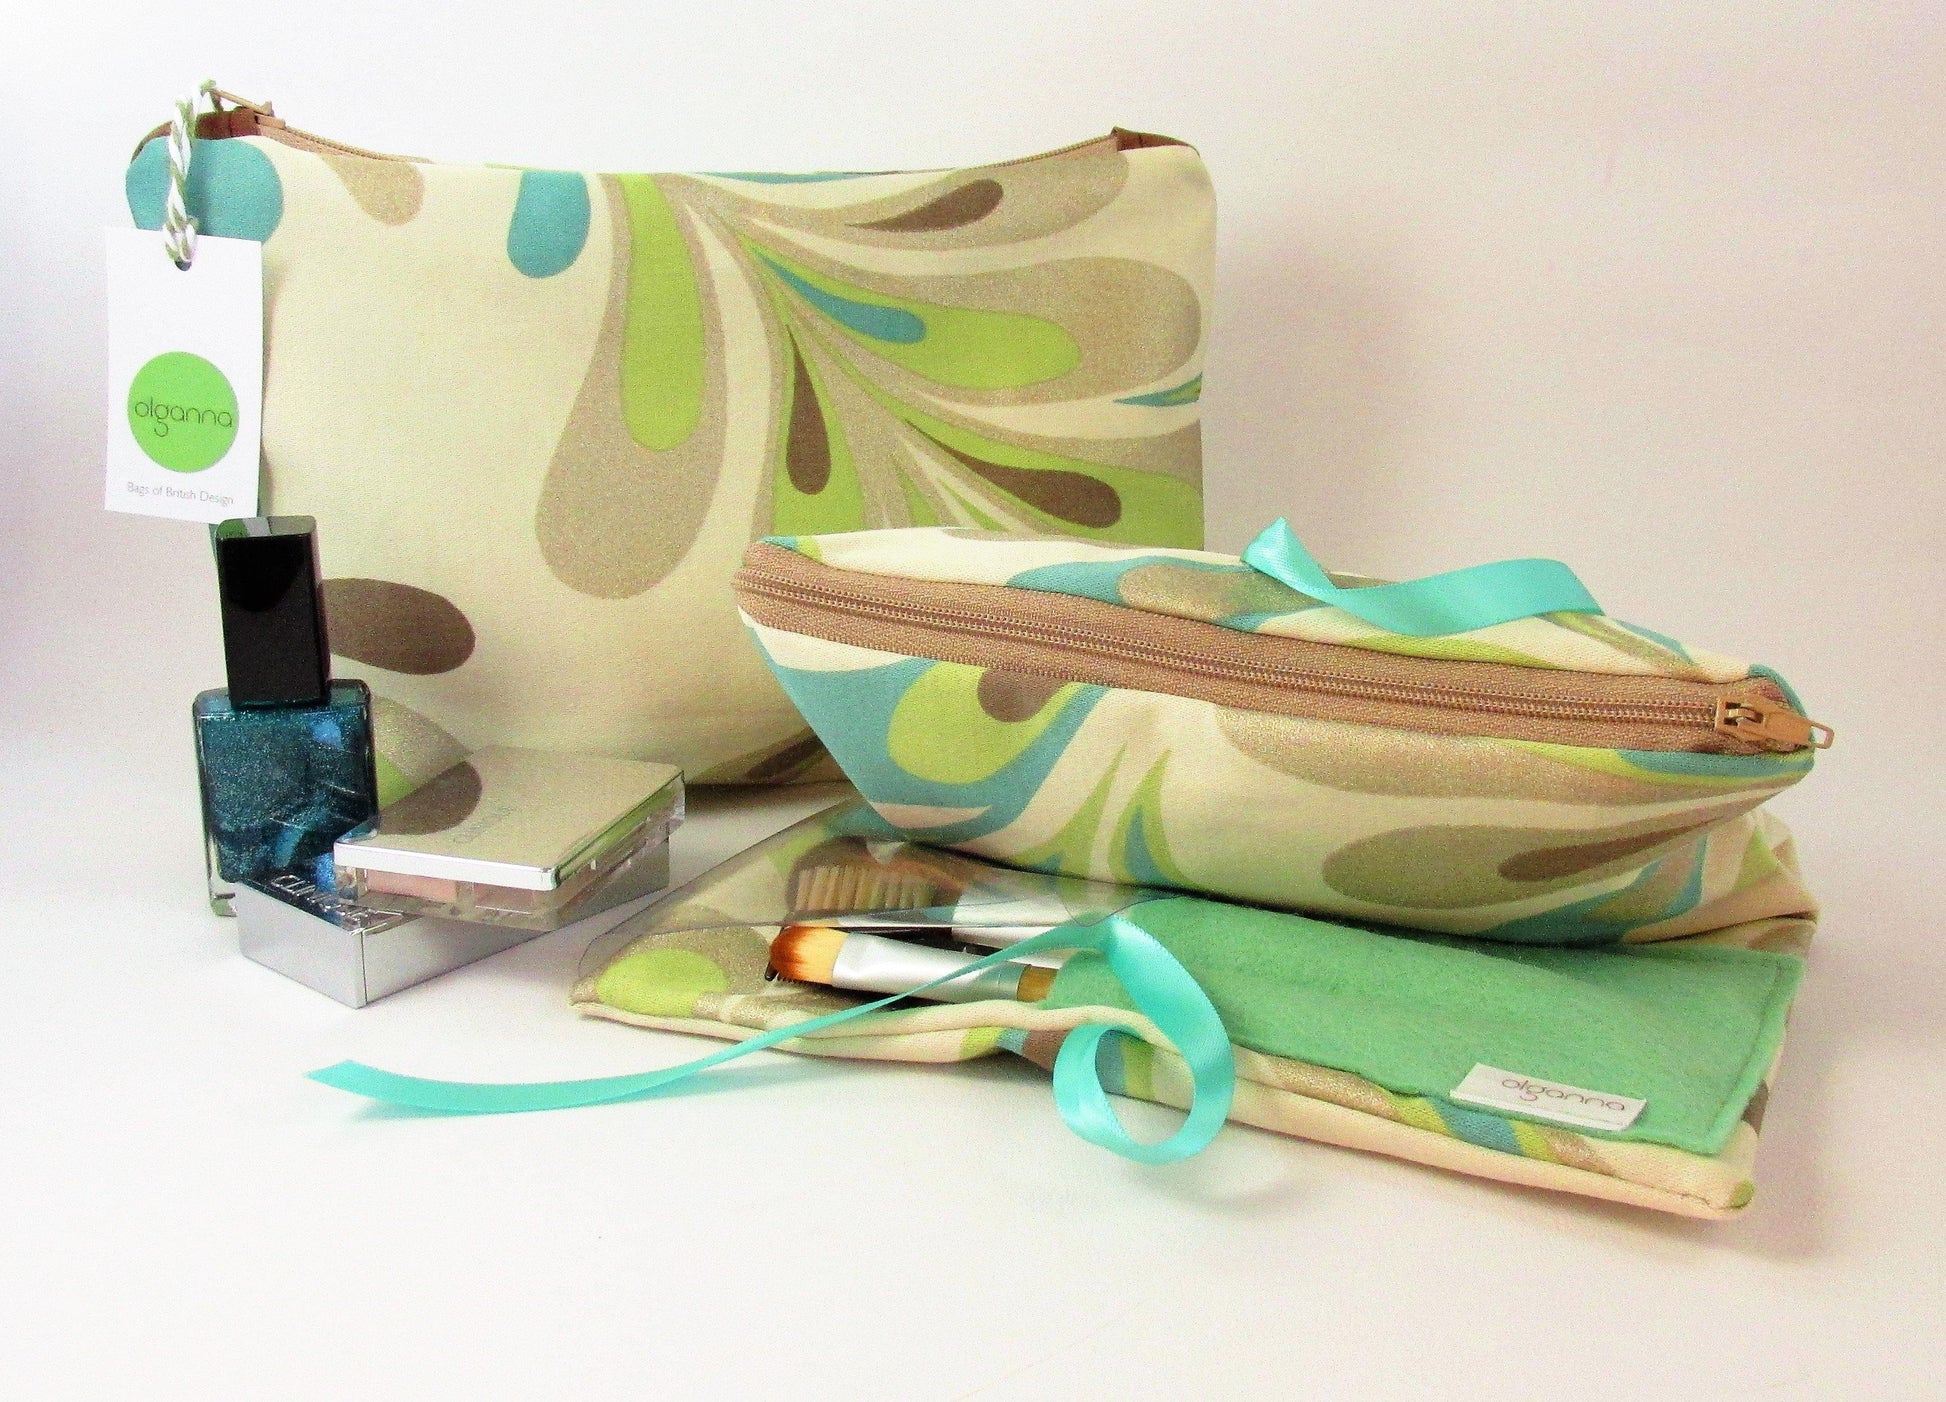 Make Up Bag Set, Make up bag with brushes Holder, Toiletry bag for ladies, What to get my daughter? Practical Gift, Aqua Swirl - Olganna